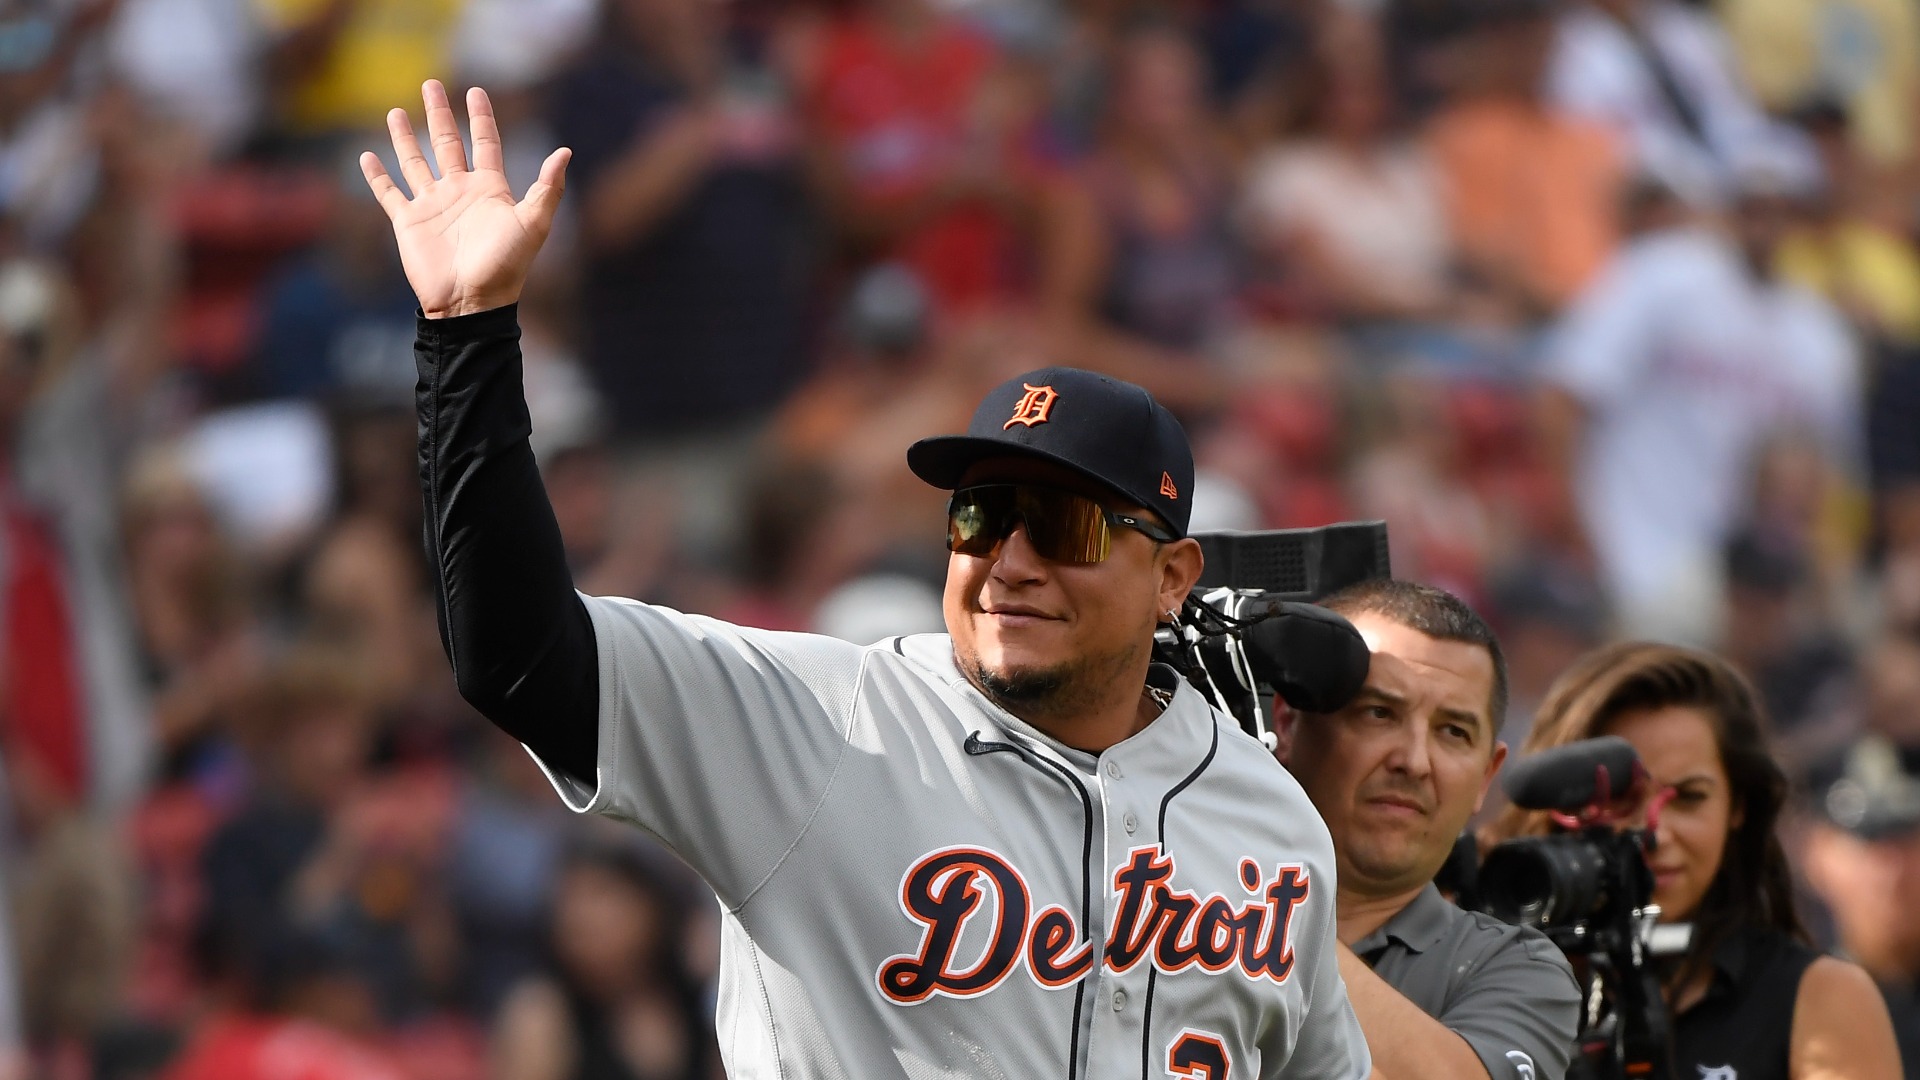 This weekend Miguel Cabrera makes one last trip back to where it